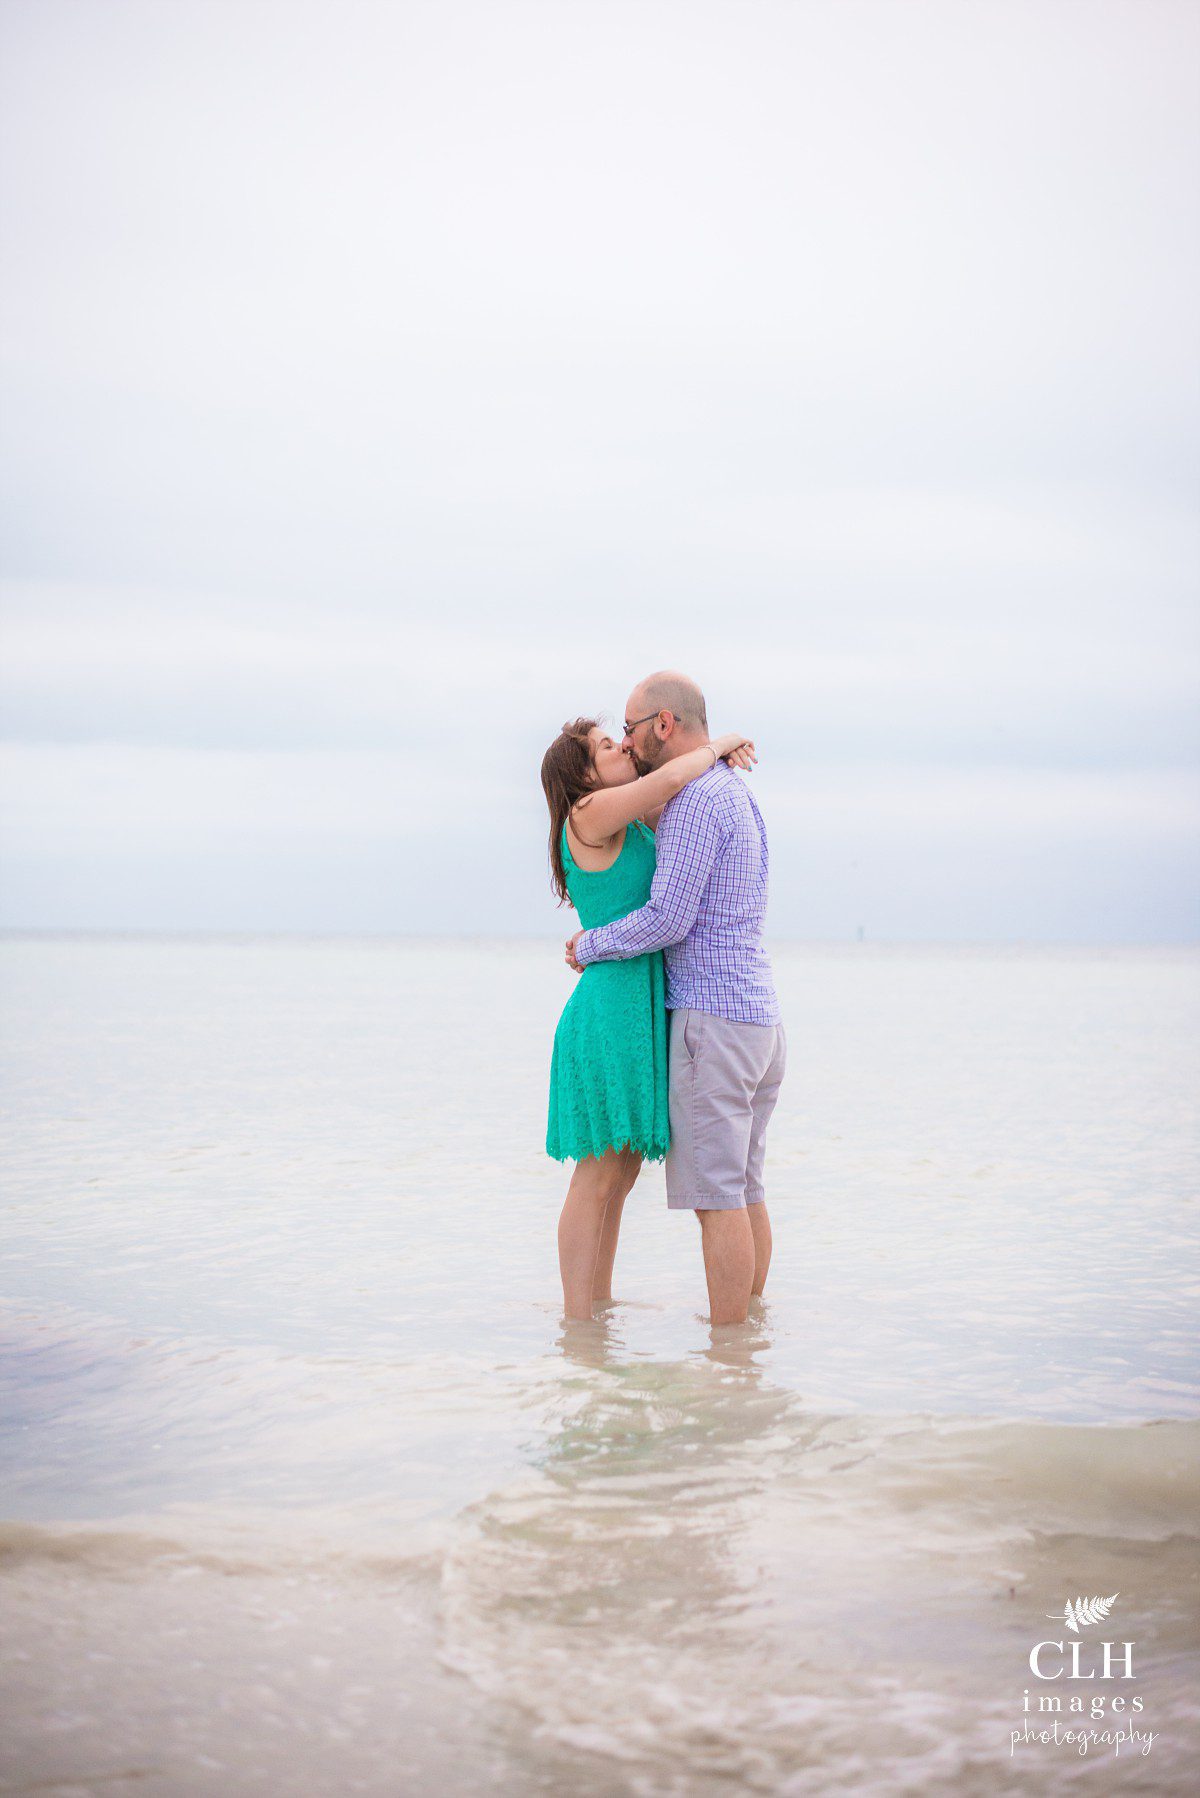 CLH images Photography - Sunrise Beach Session - Key West Photographer - Couples Beach Photography - Florida Photographer - Key West Photos - South Beach Key West (10)